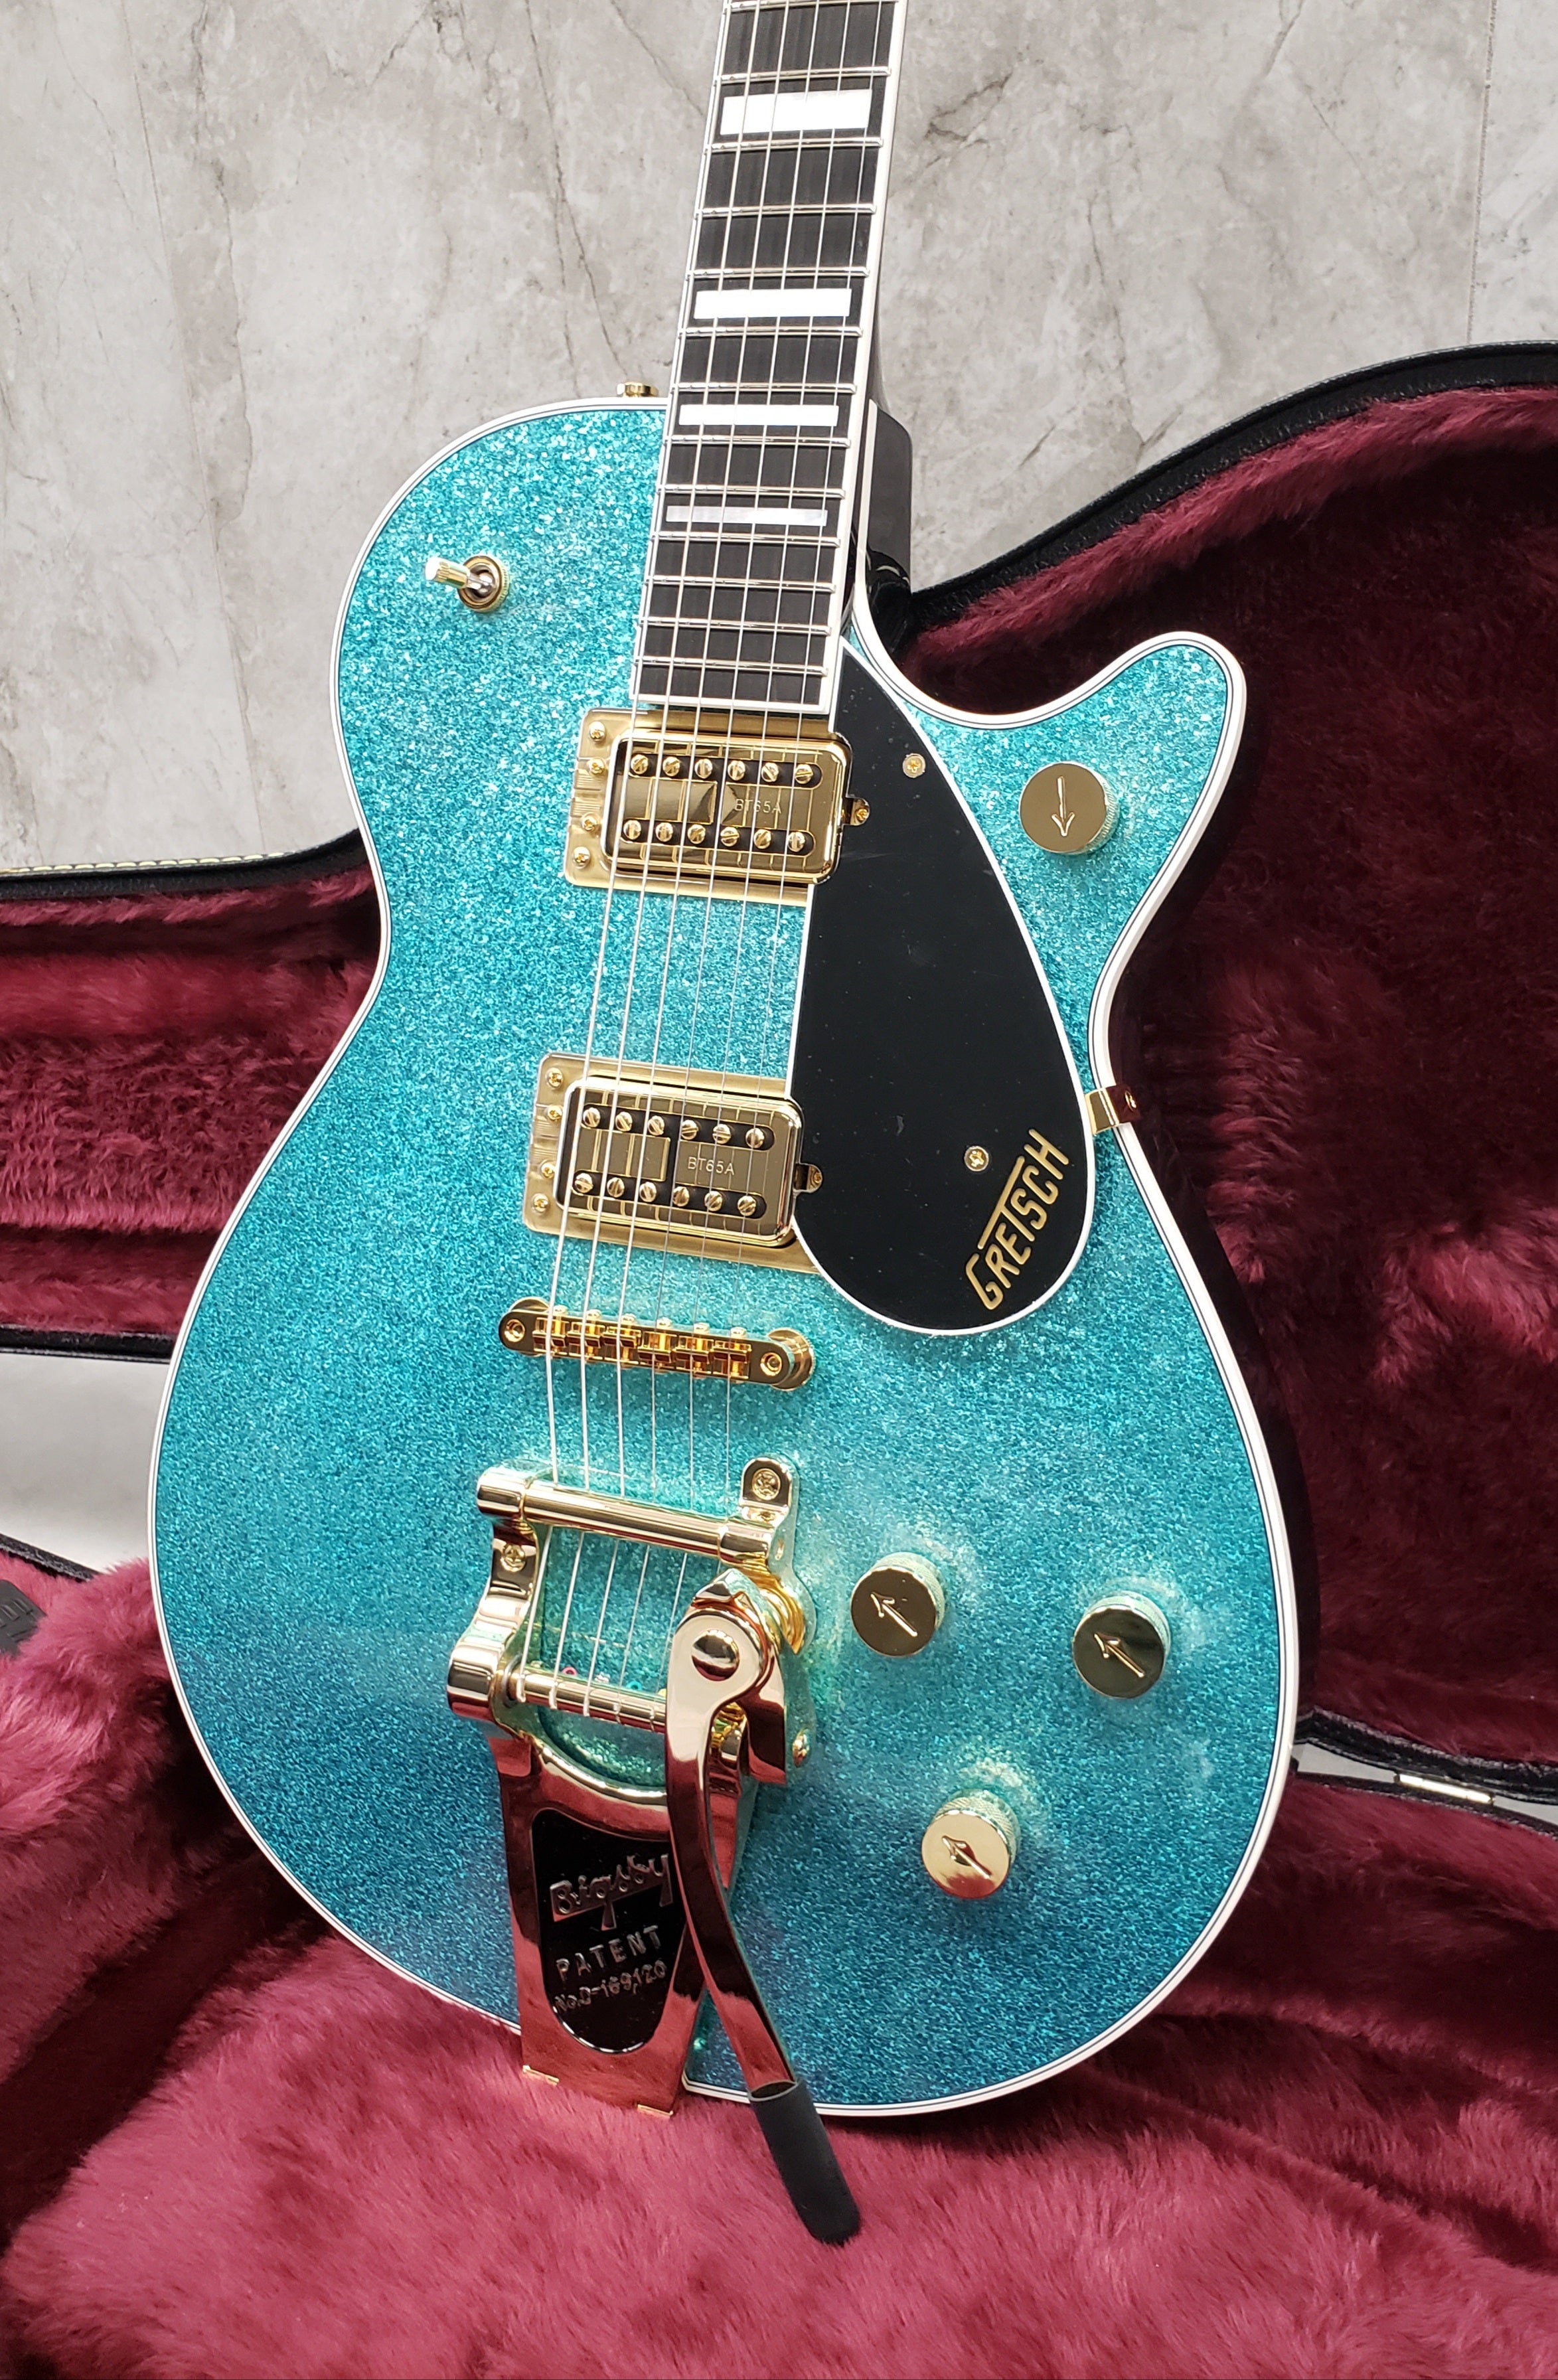 GRETSCH G6229TG Limited Edition Players Edition Sparkle Jet BT with Bigsby Ocean Turquoise Sparkle 2403410813 SERIAL NUMBER JT21114799 - 8.6 LBS